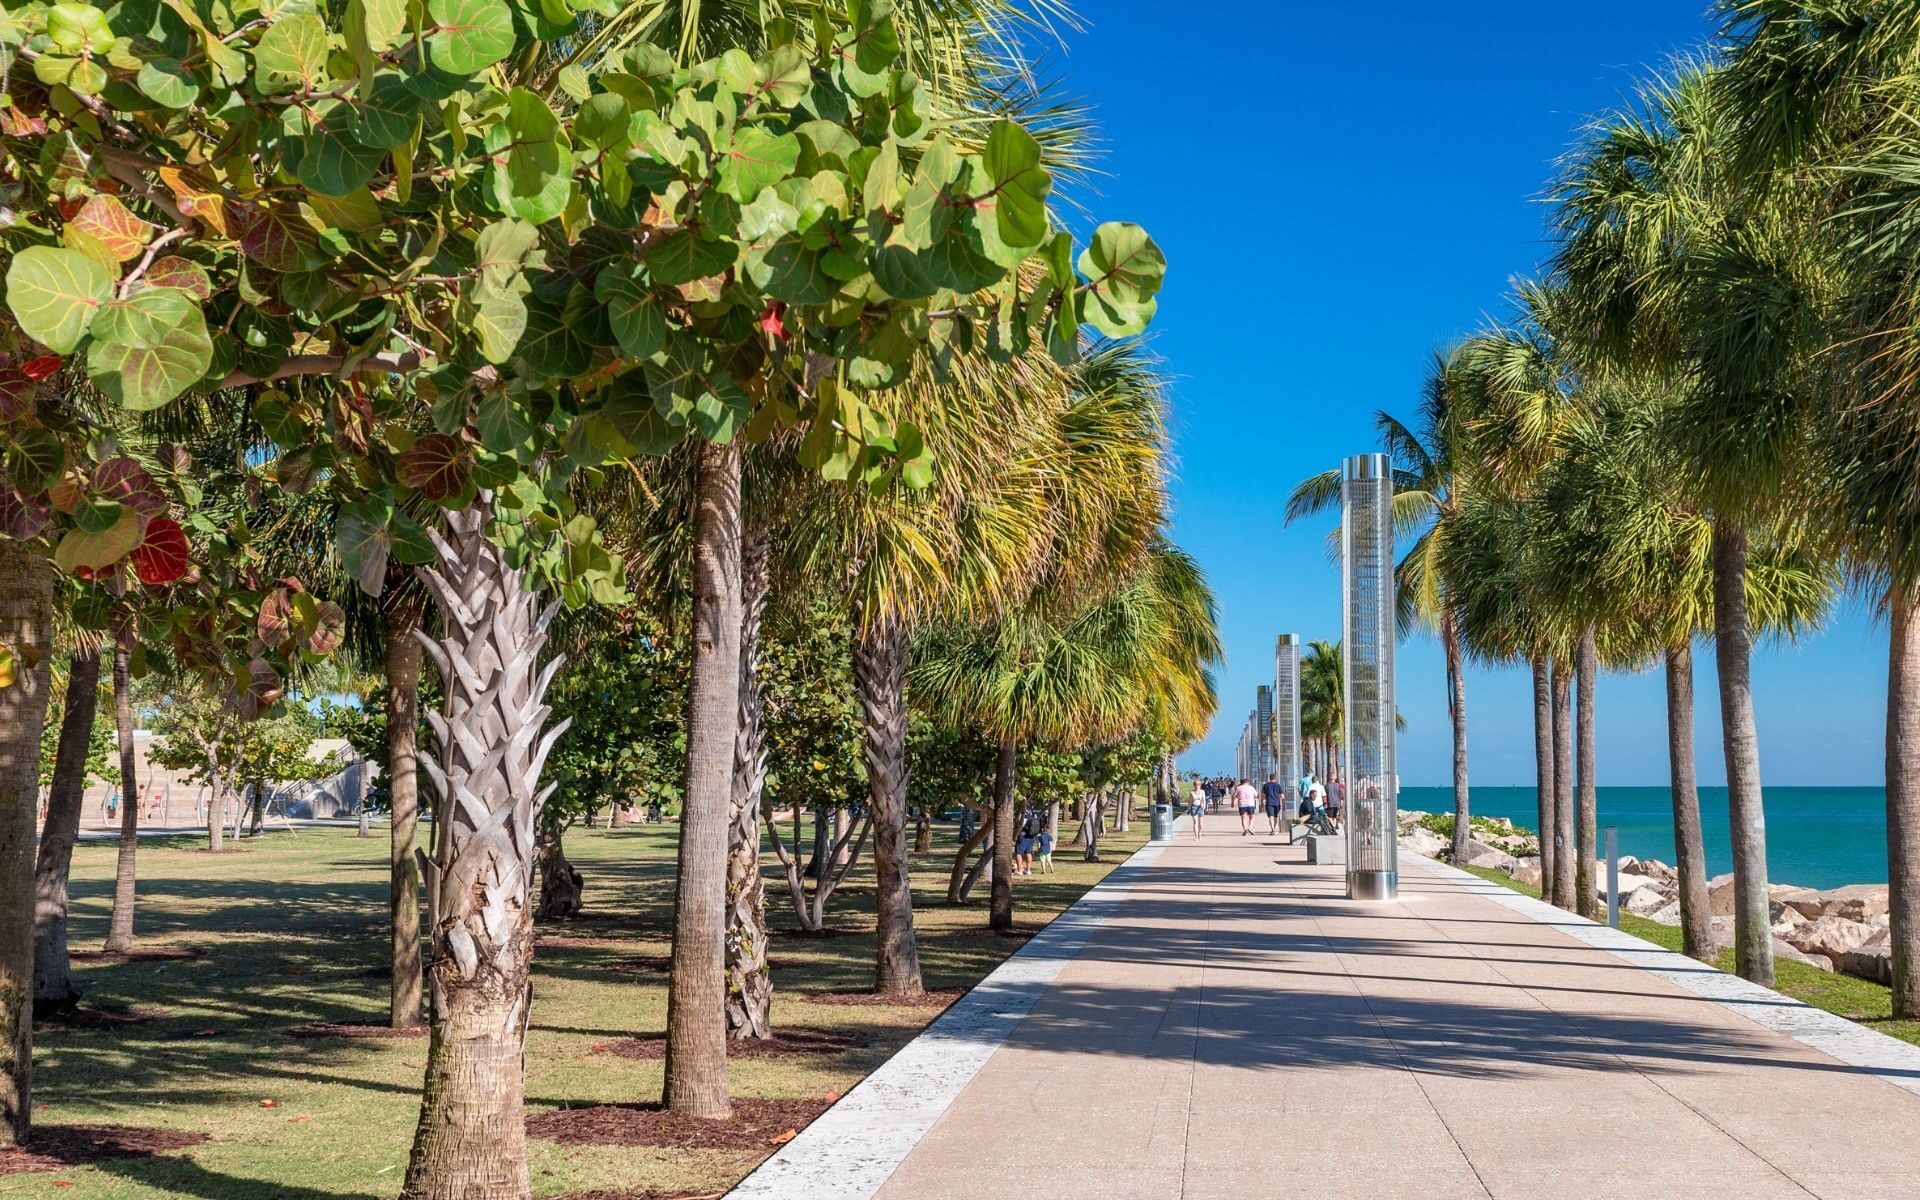 trees in winter along the waterfront in Miami.